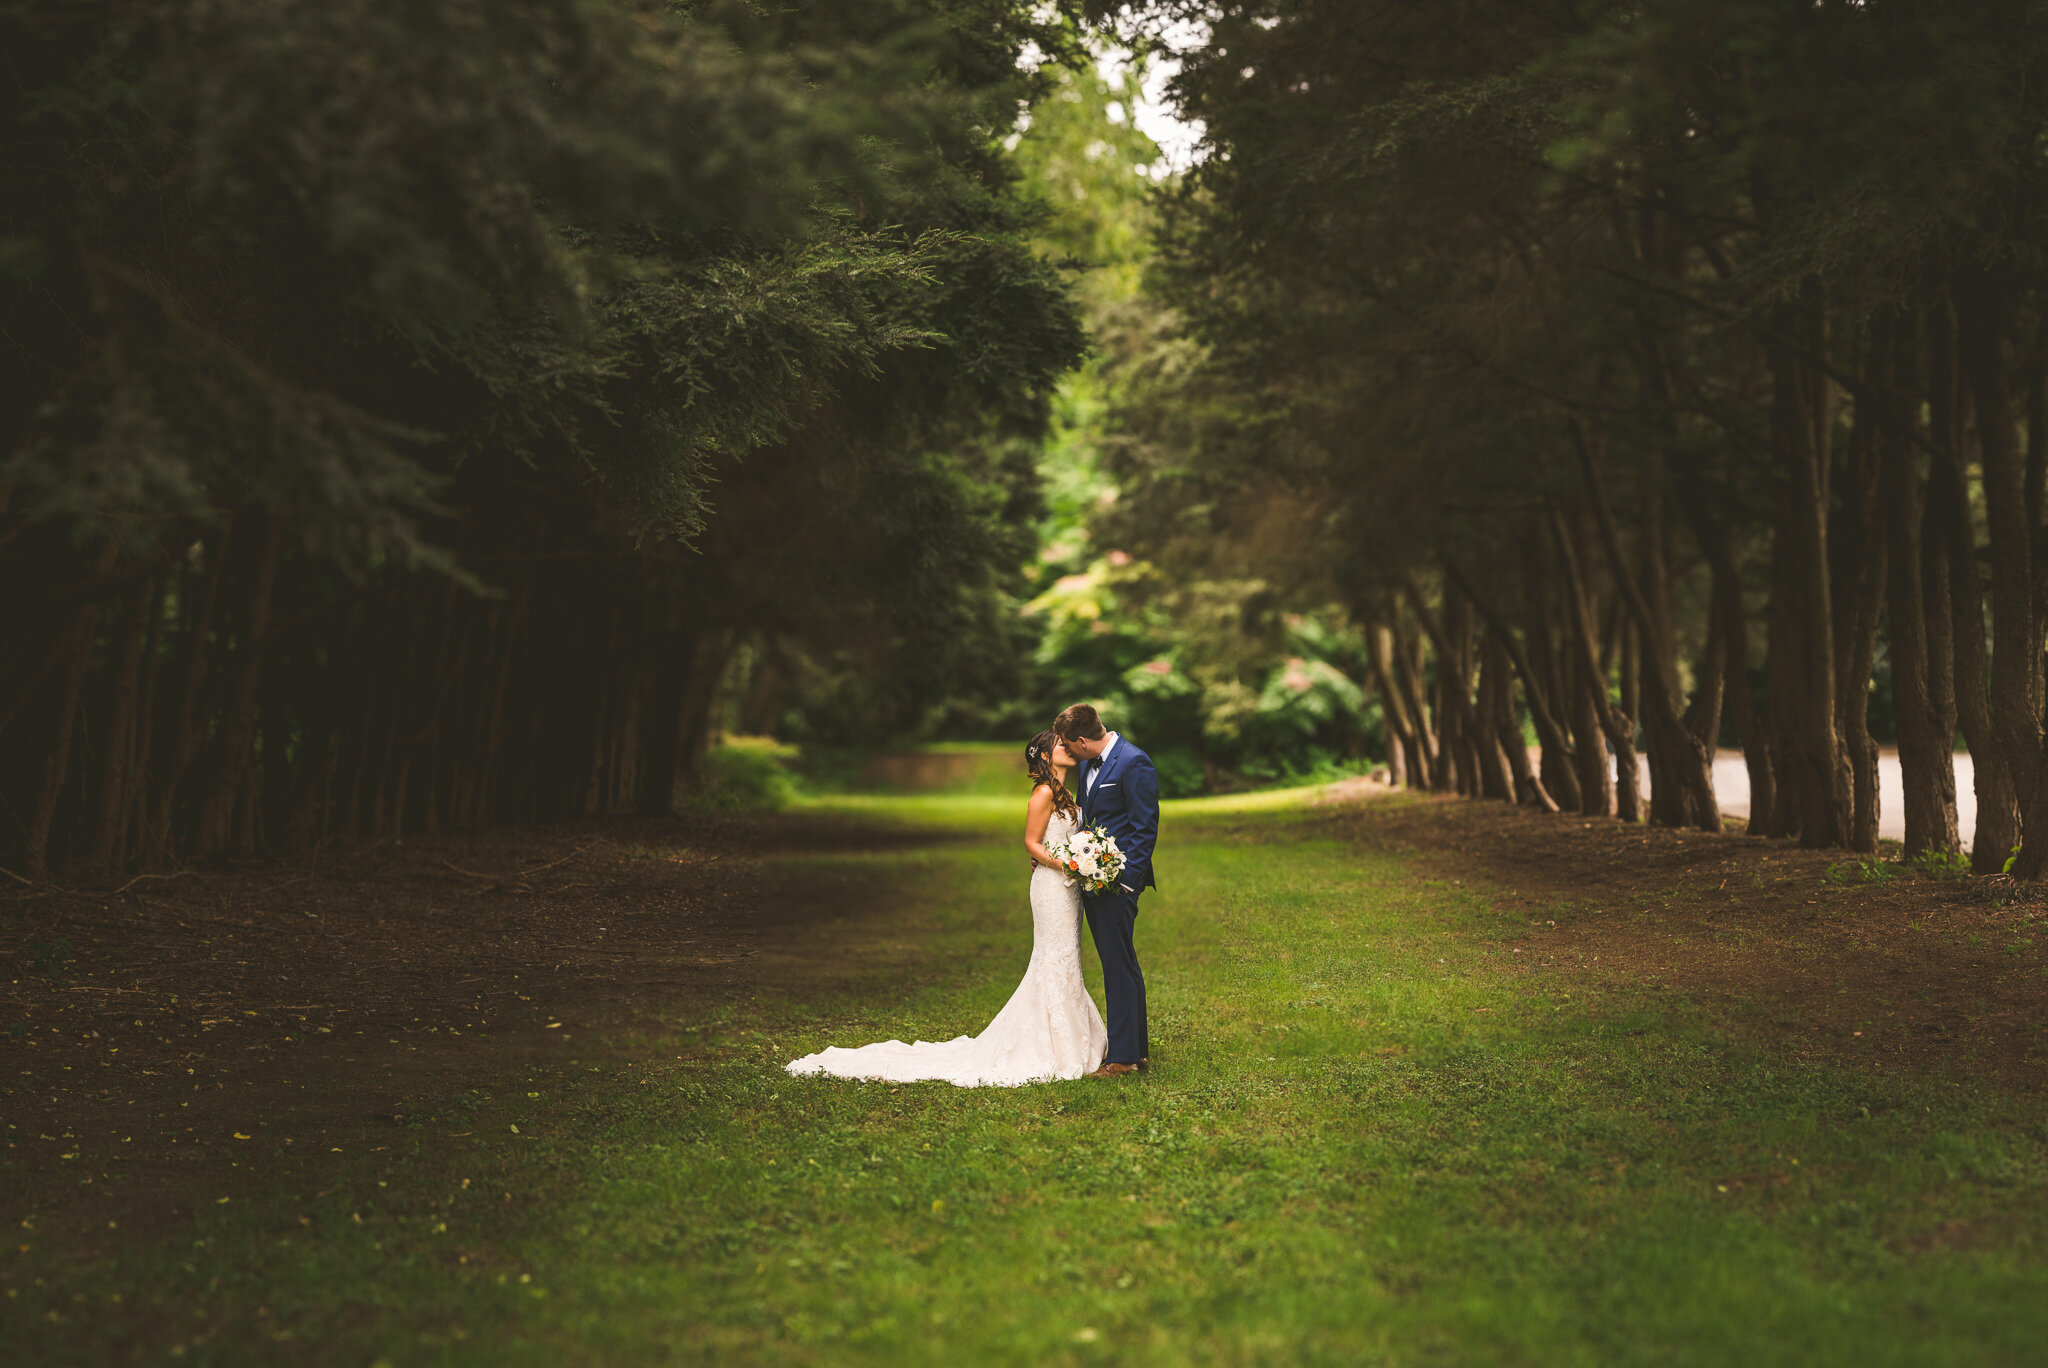 Classic tree lined image of the bride and groom on their wedding day at their Long Island, de Seversky Mansion wedding.